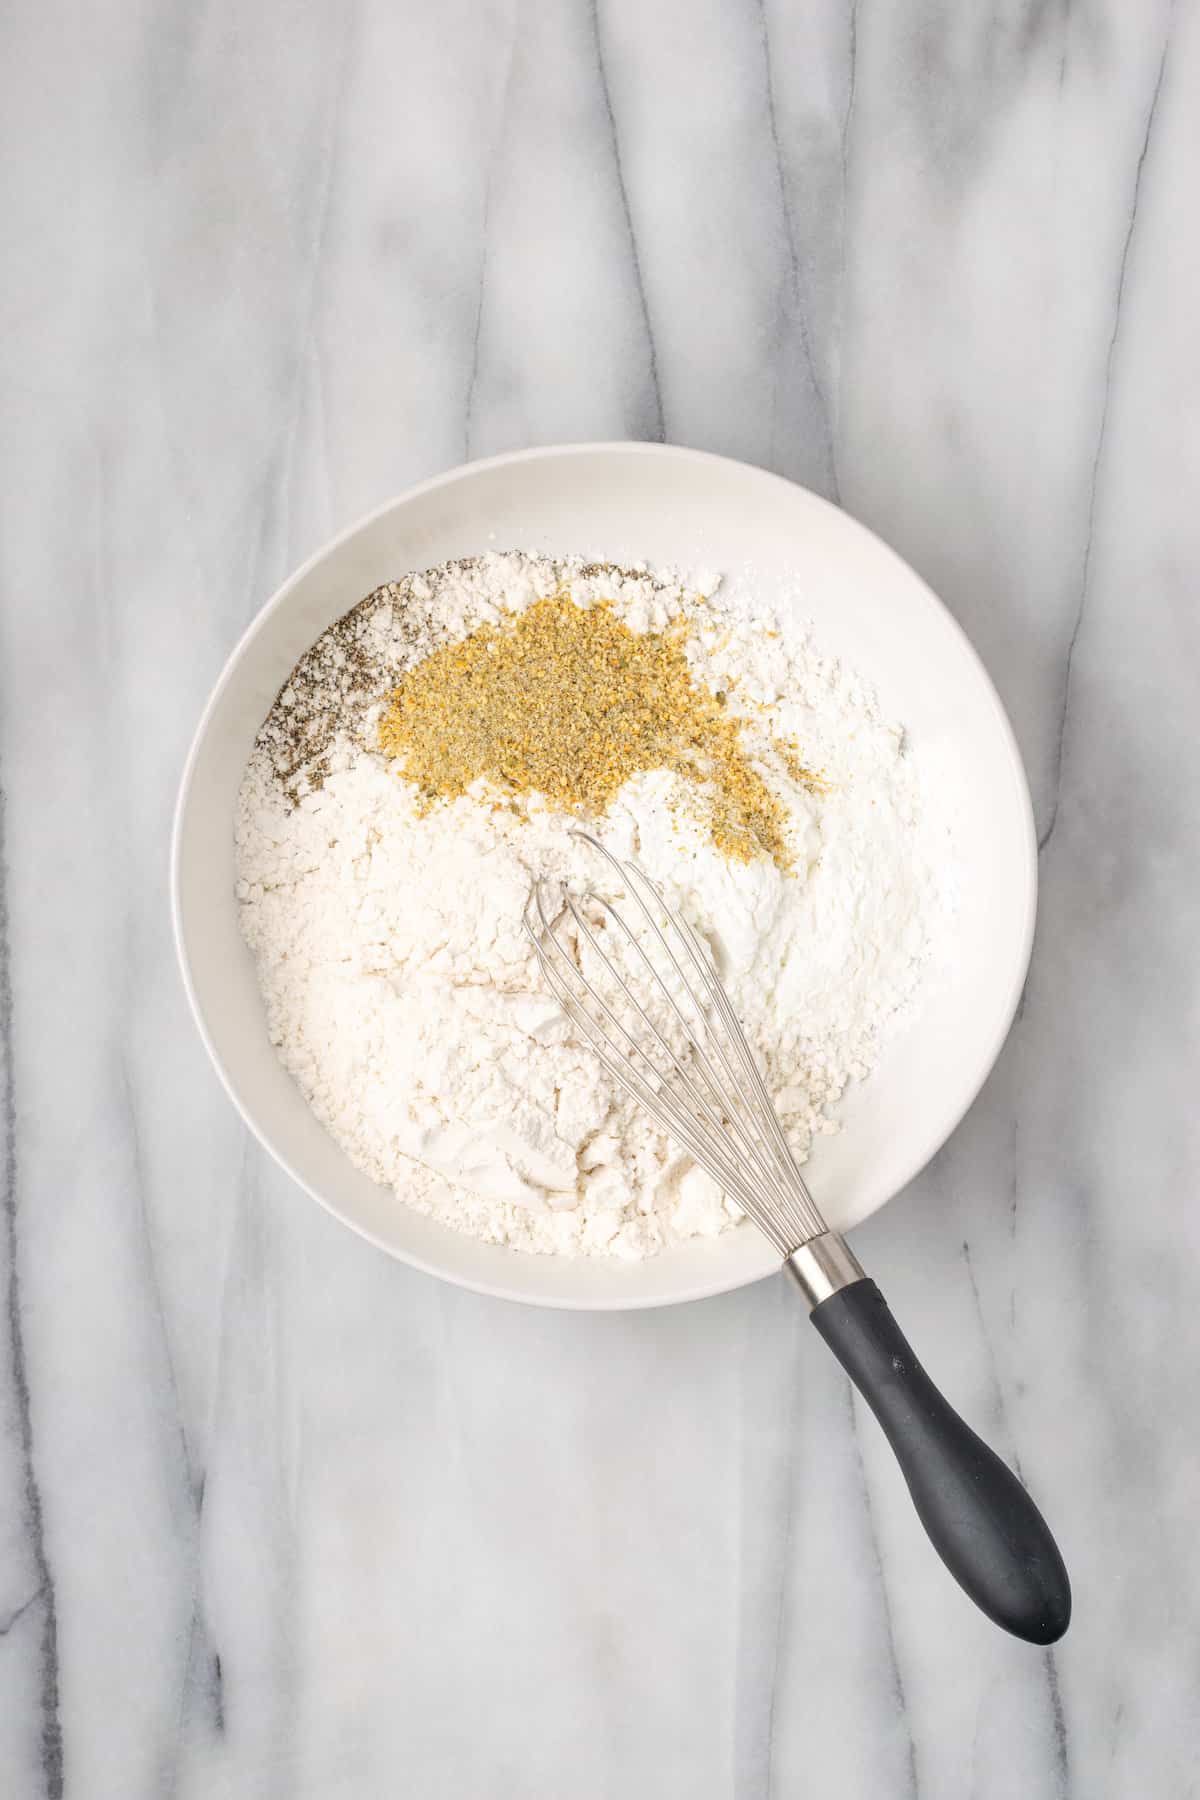 Seasoned flour is whisked together in a white bowl.